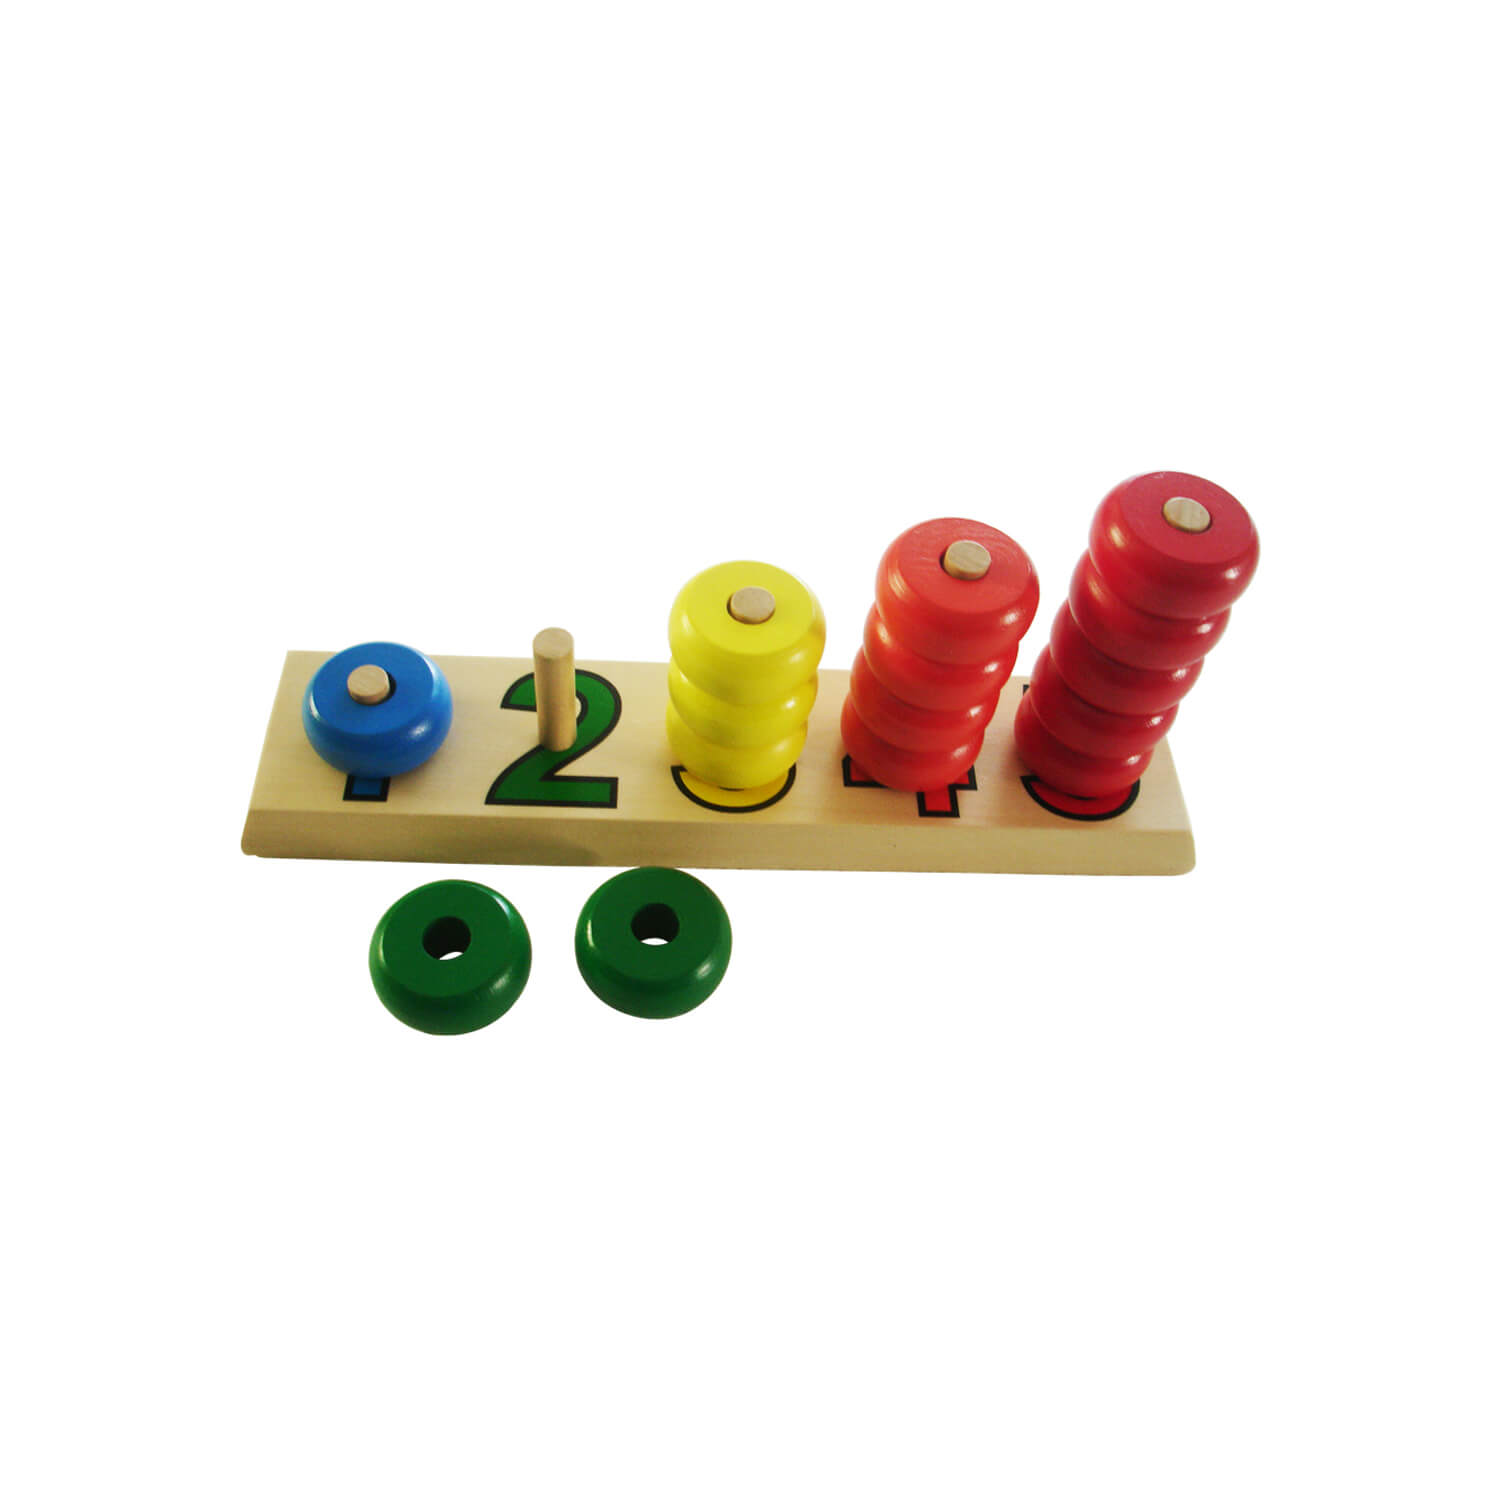 5 Colors Abacus